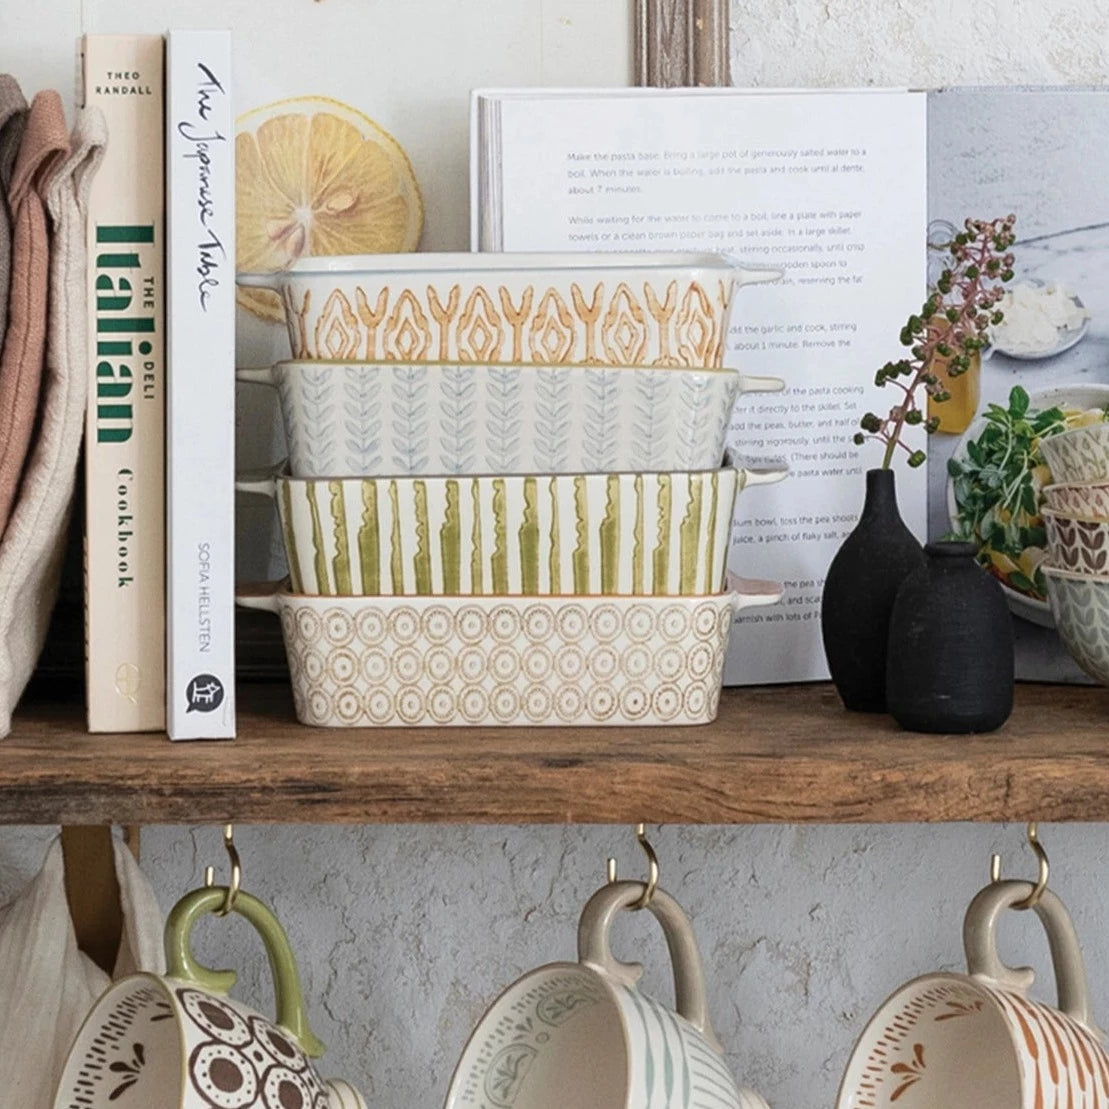 stack of 4 baking dishes on a wooden shelf with books, vases, and mugs on hooks underneath.